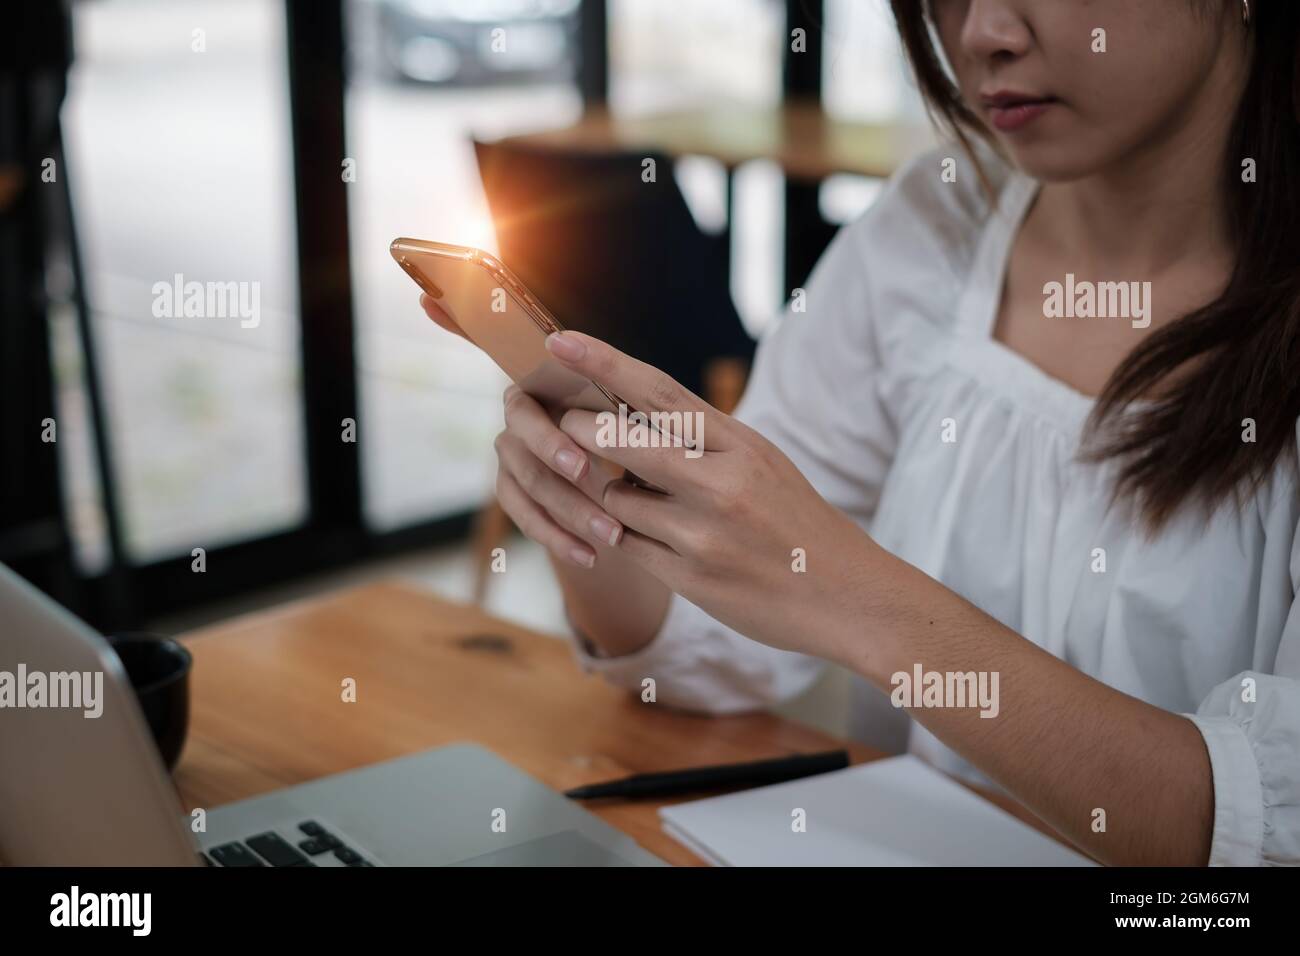 Woman scan her face for KYC security her saving bank account. Biometric data security concept. Stock Photo